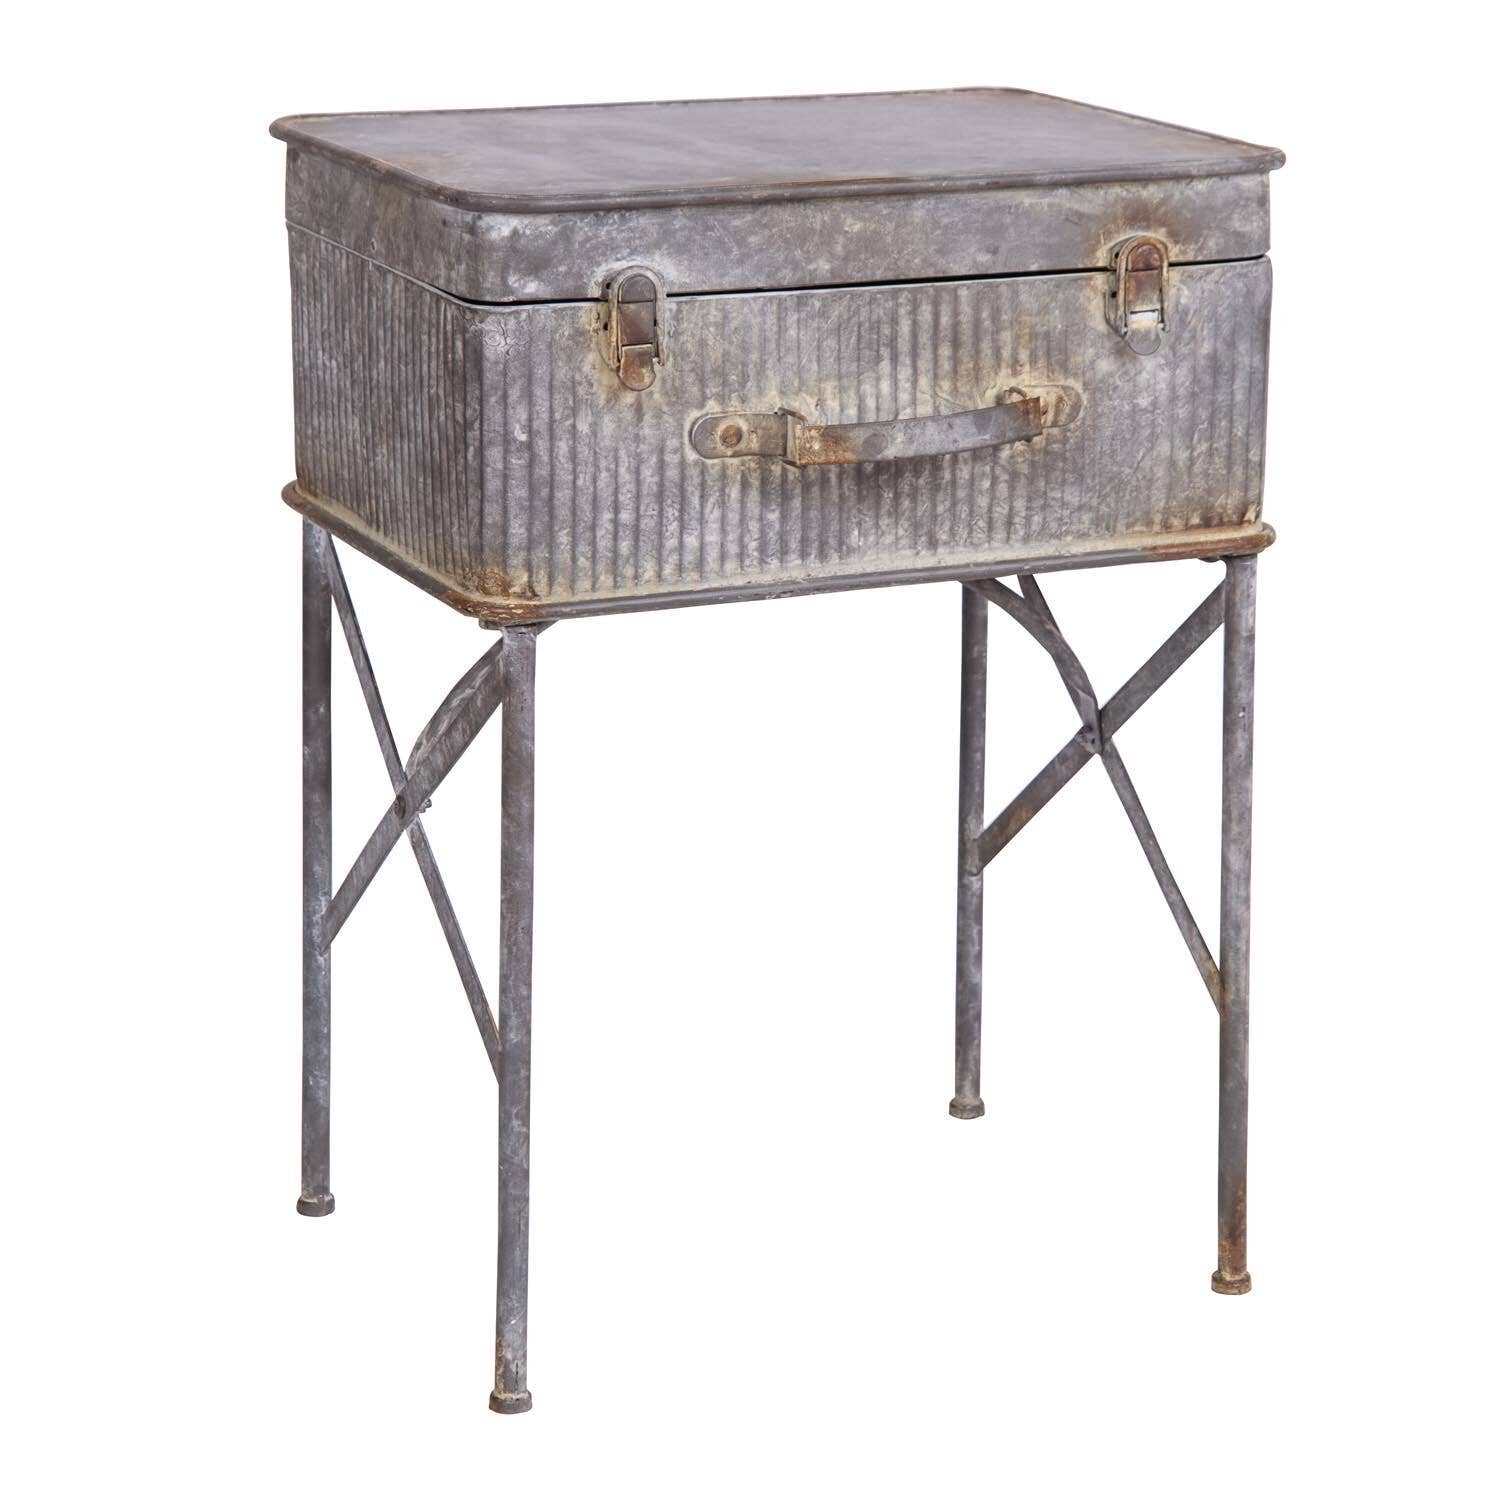 Foreside, Devon Suitcase Side Table, Home Goods, Foreside, Boutique Dandelion - Boutique Dandelion